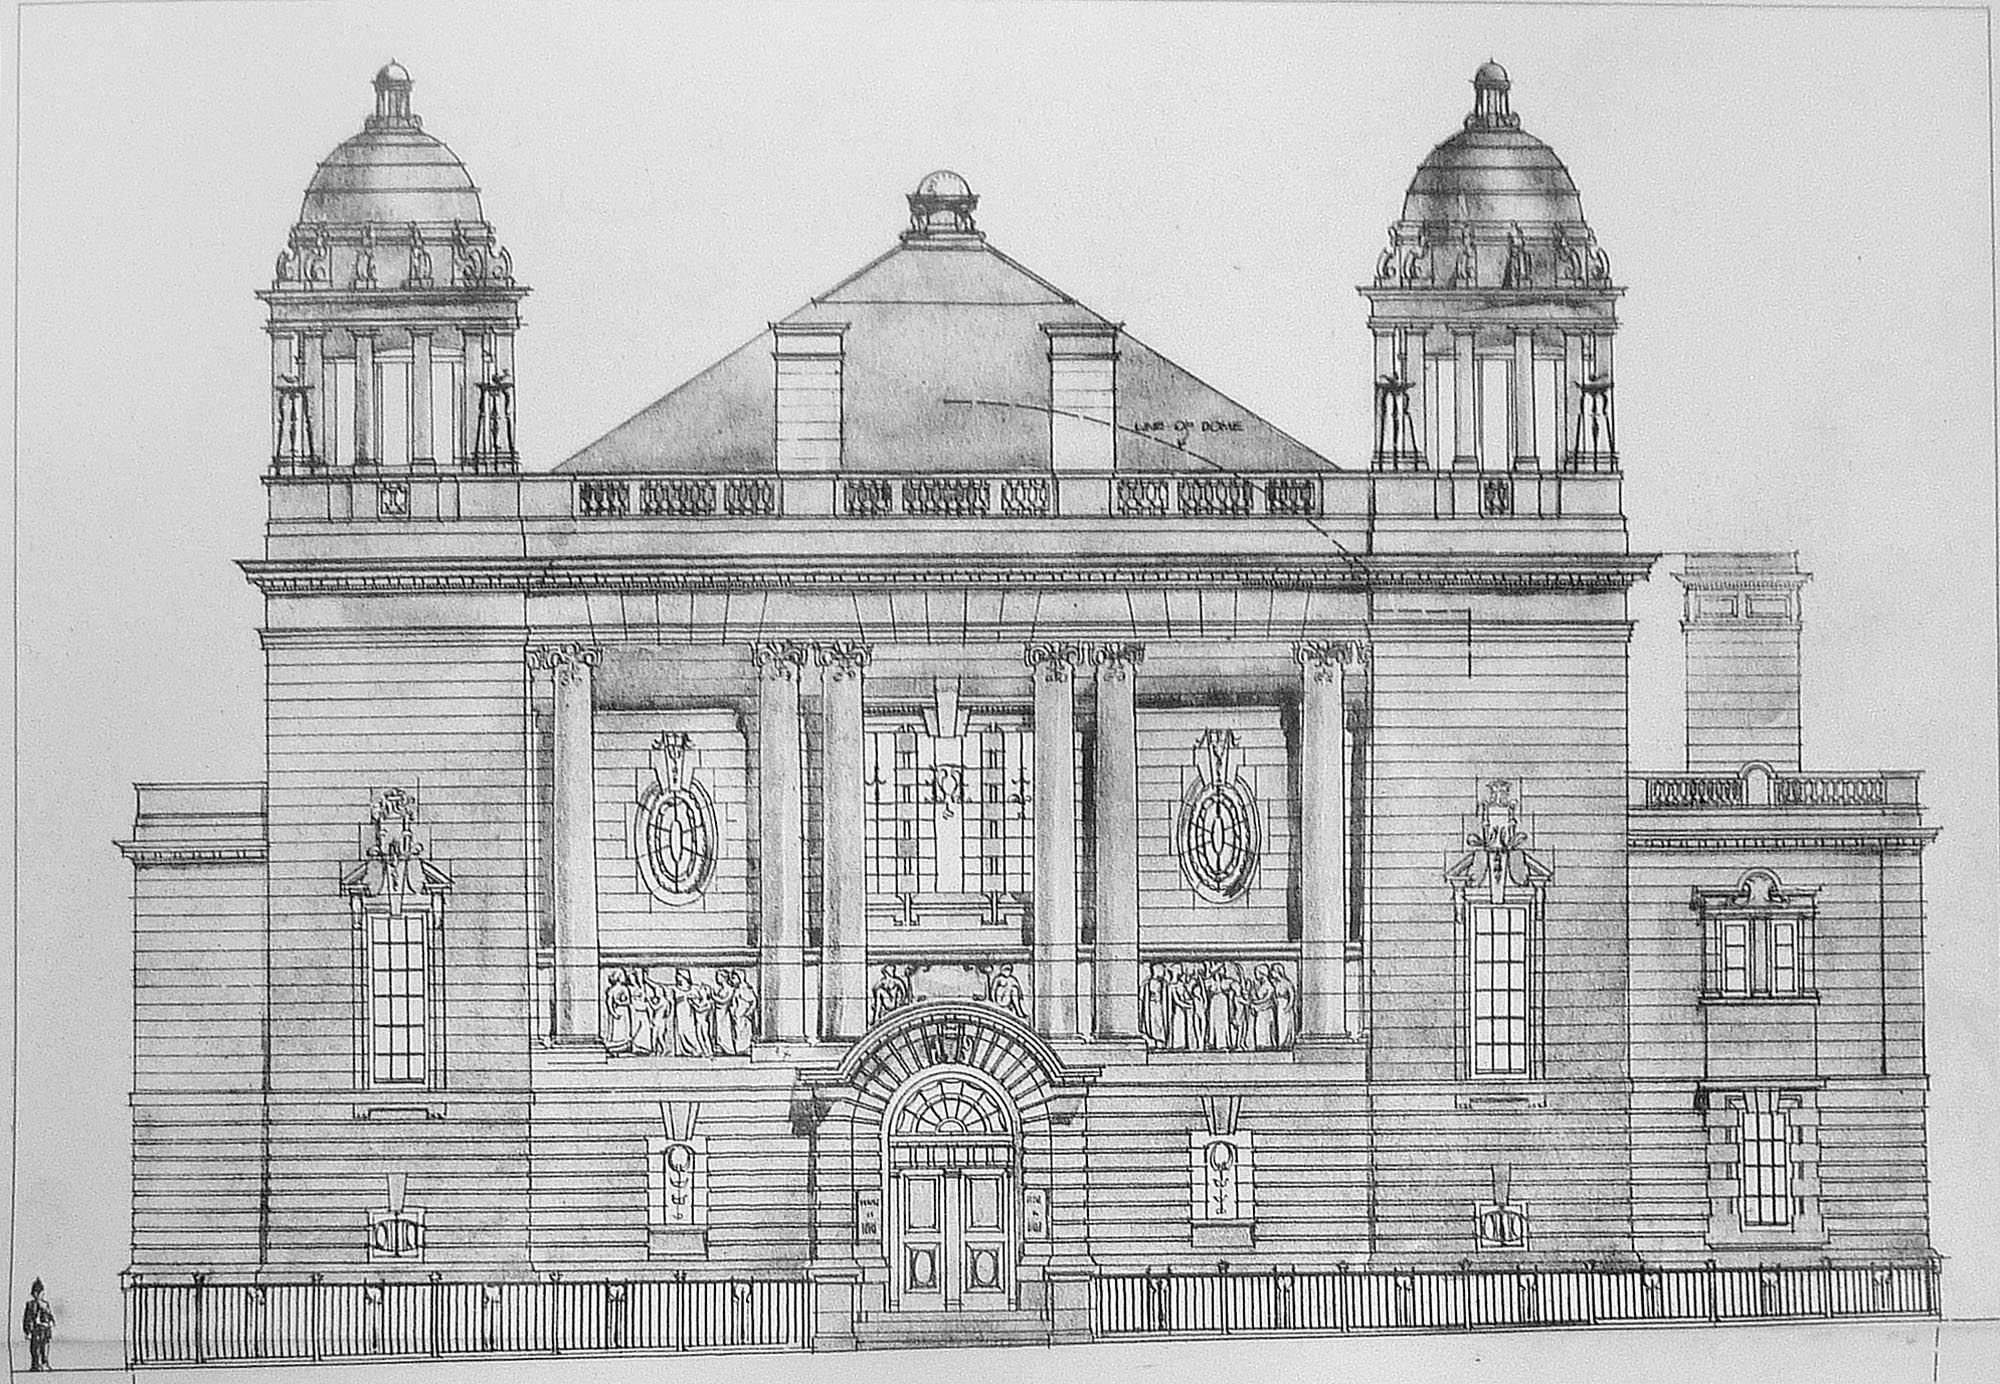 Architectural plans for the building - Leicestershire Record Office